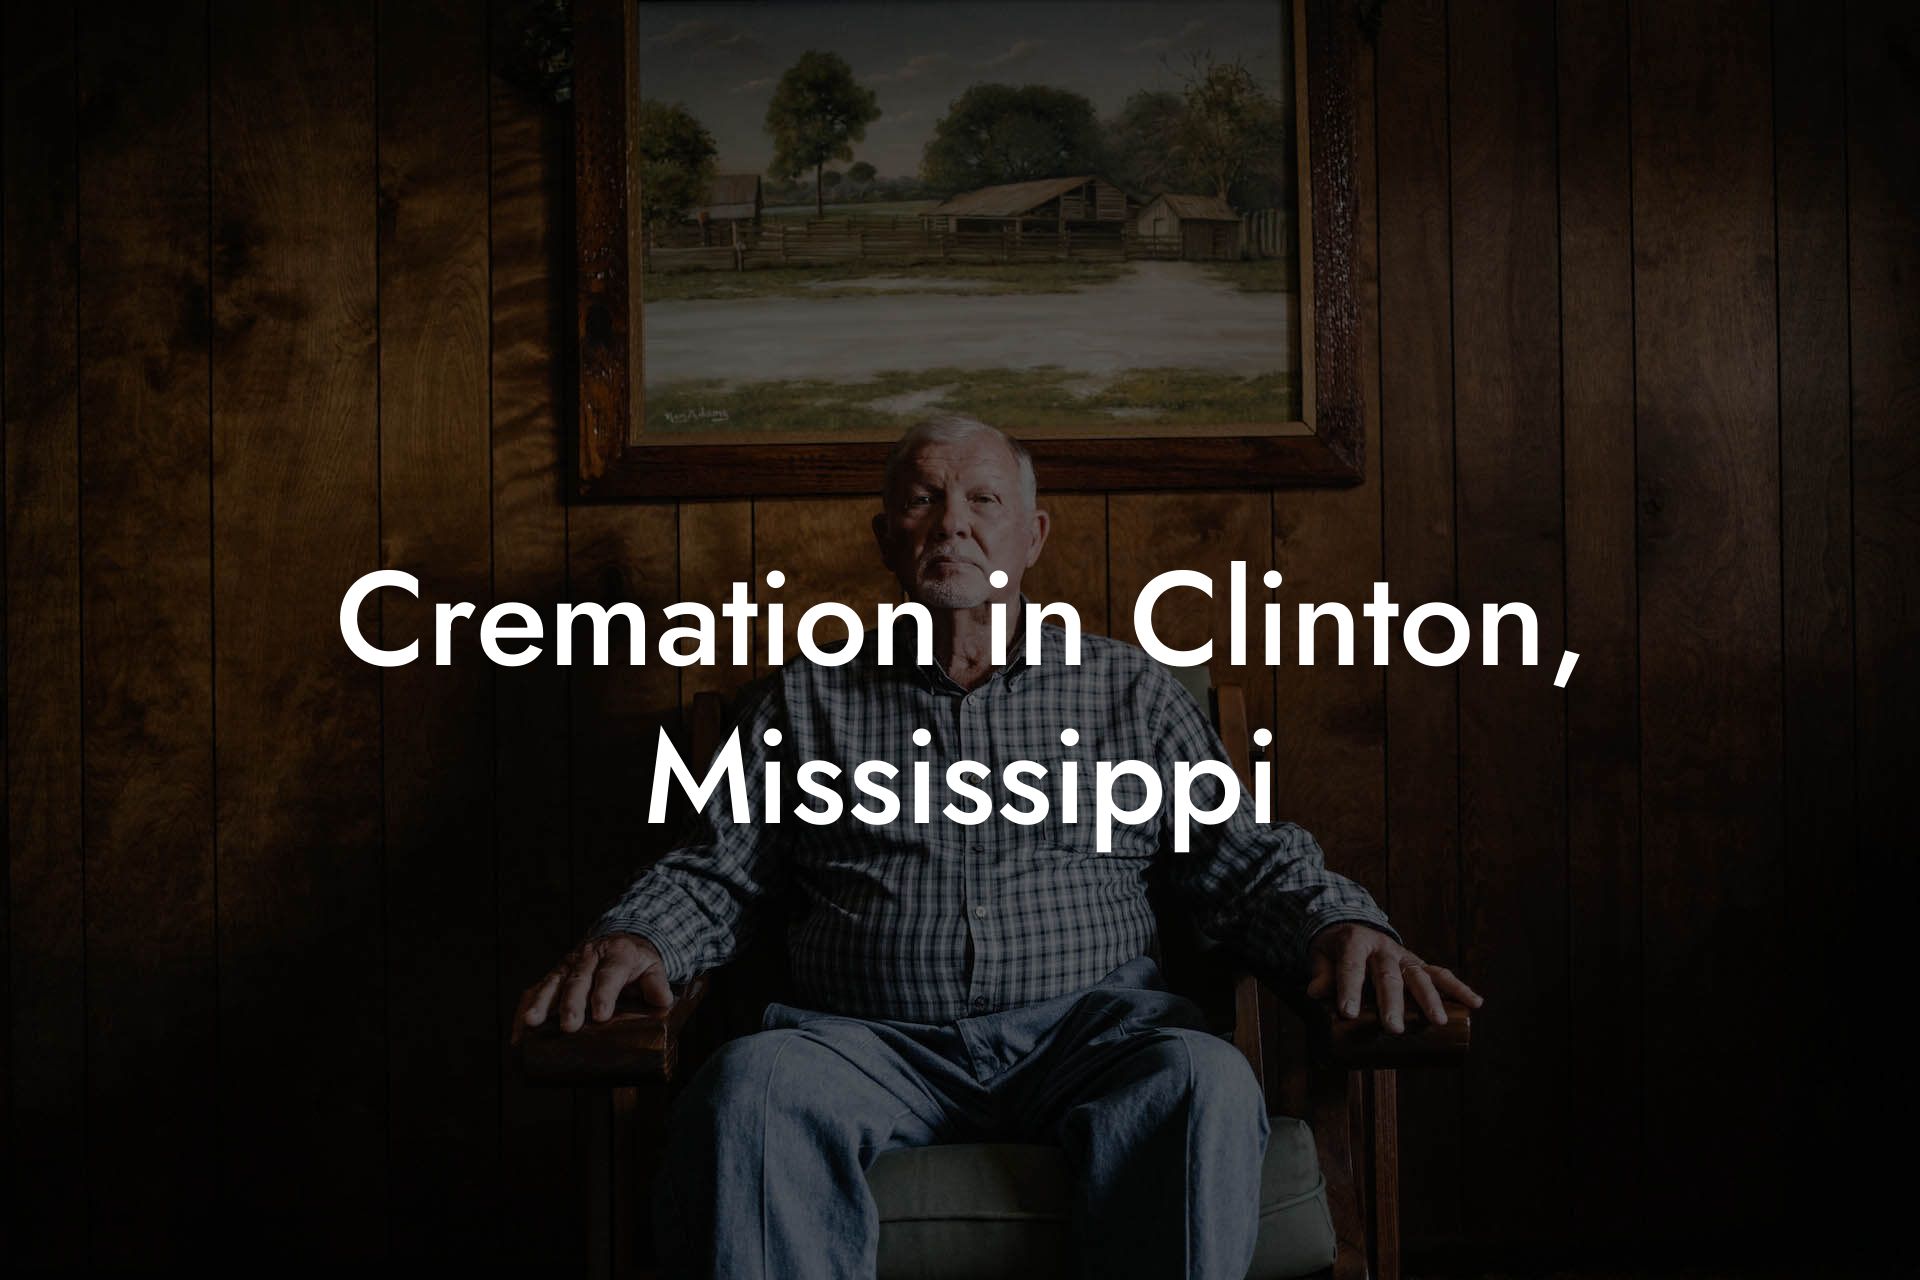 Cremation in Clinton, Mississippi